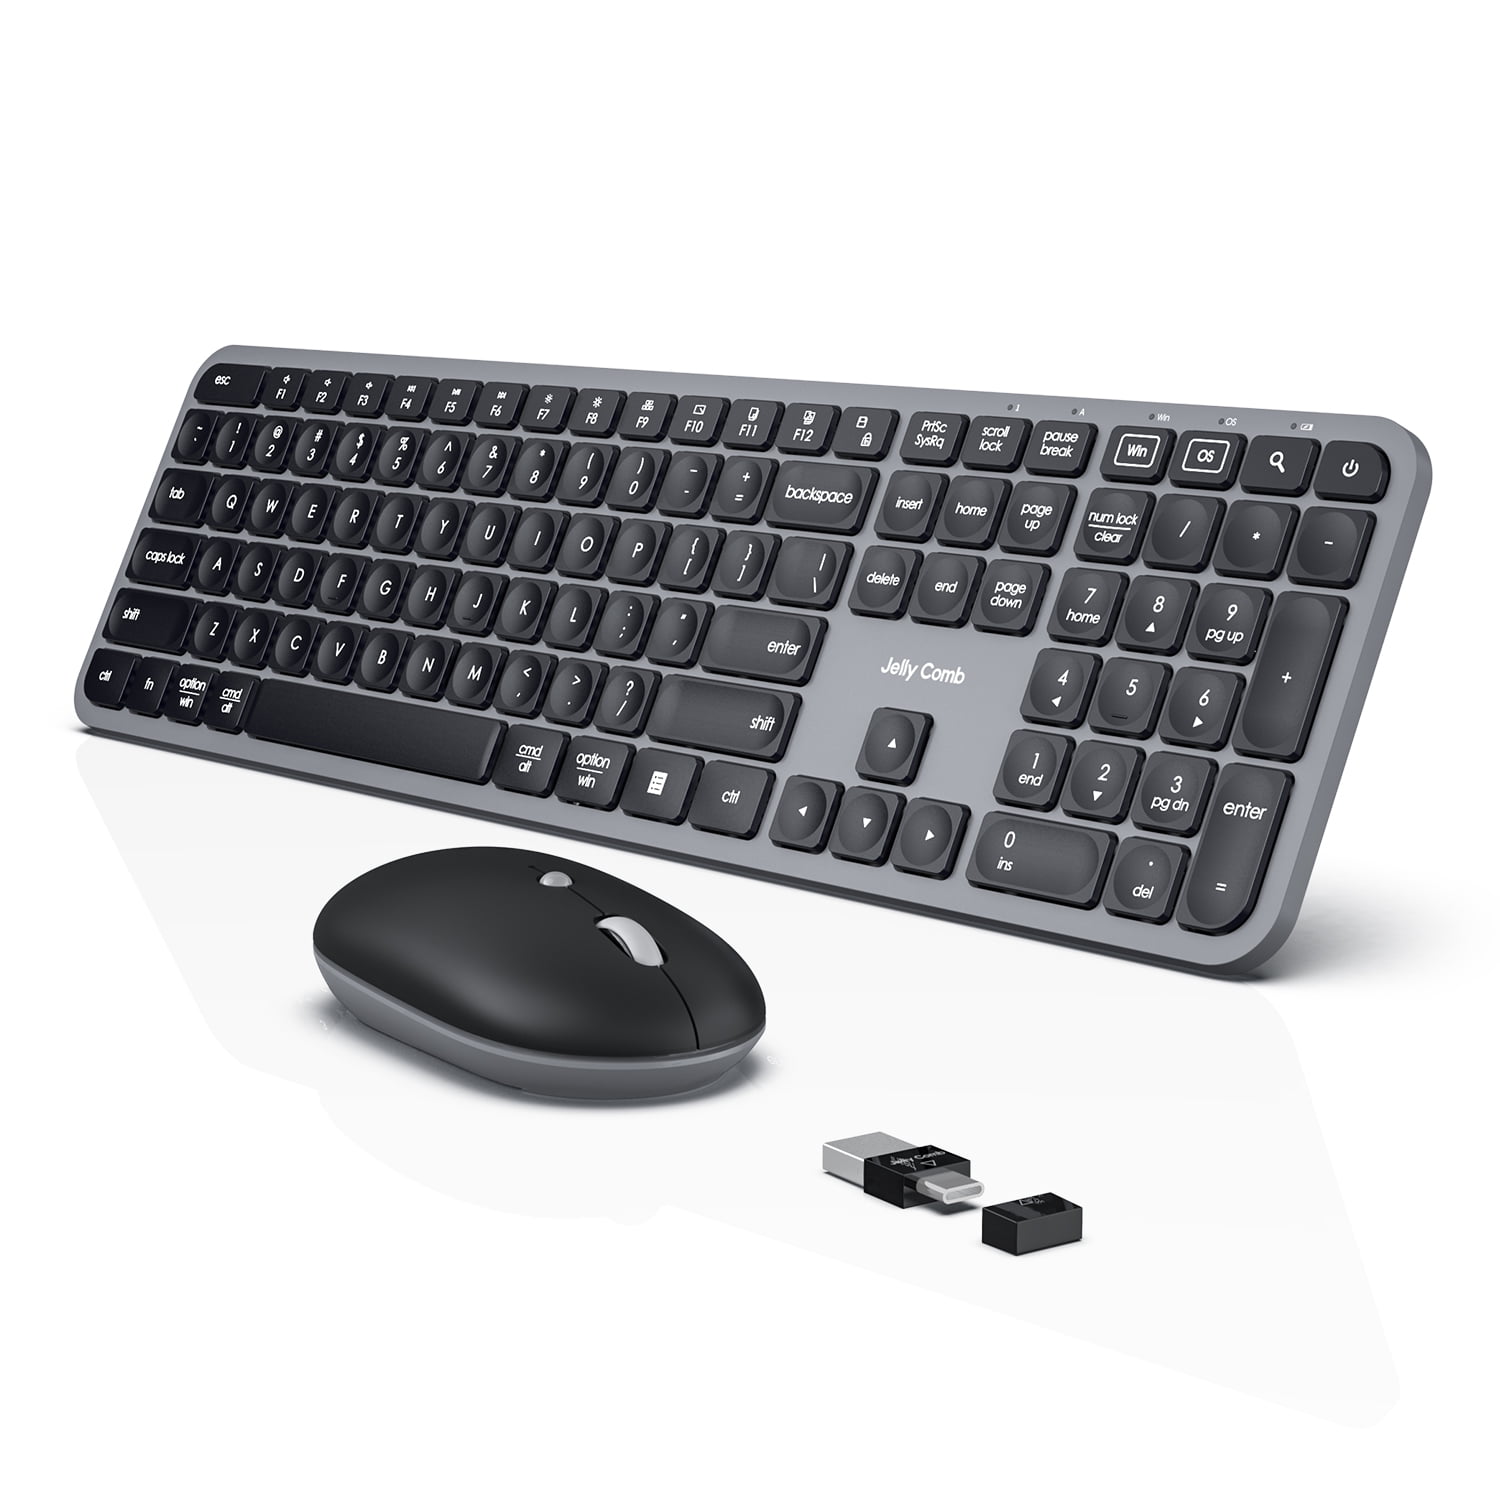 Wireless Keyboard Mouse Combo, Jelly Comb 2.4G and Keyboard and Mouse Set with Numeric Keypad for Windows, (Black) - Walmart.com